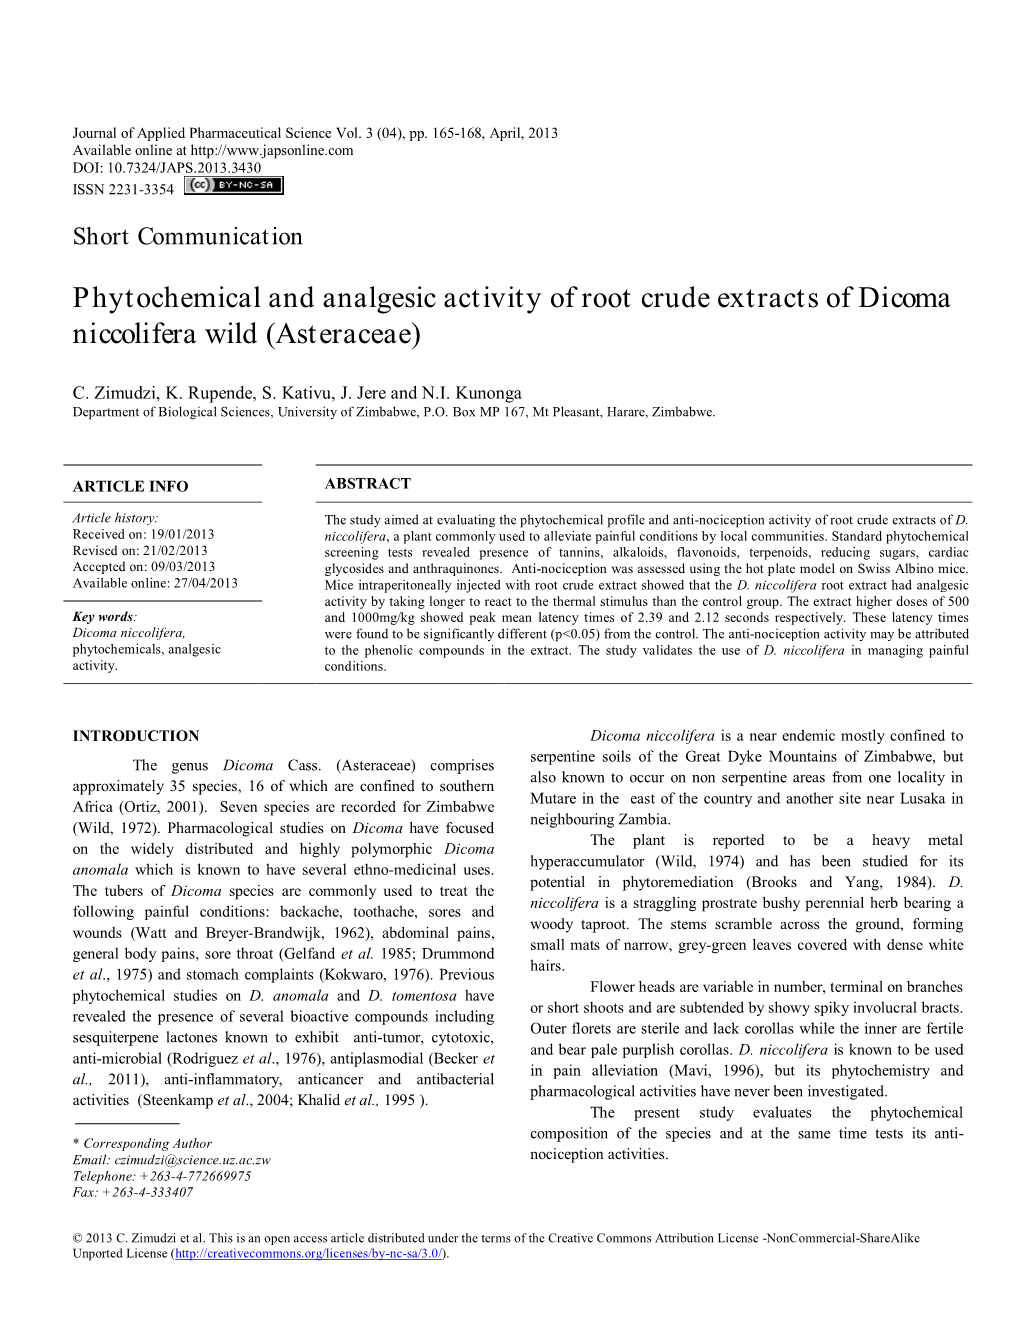 Phytochemical and Analgesic Activity of Root Crude Extracts of Dicoma Niccolifera Wild (Asteraceae)